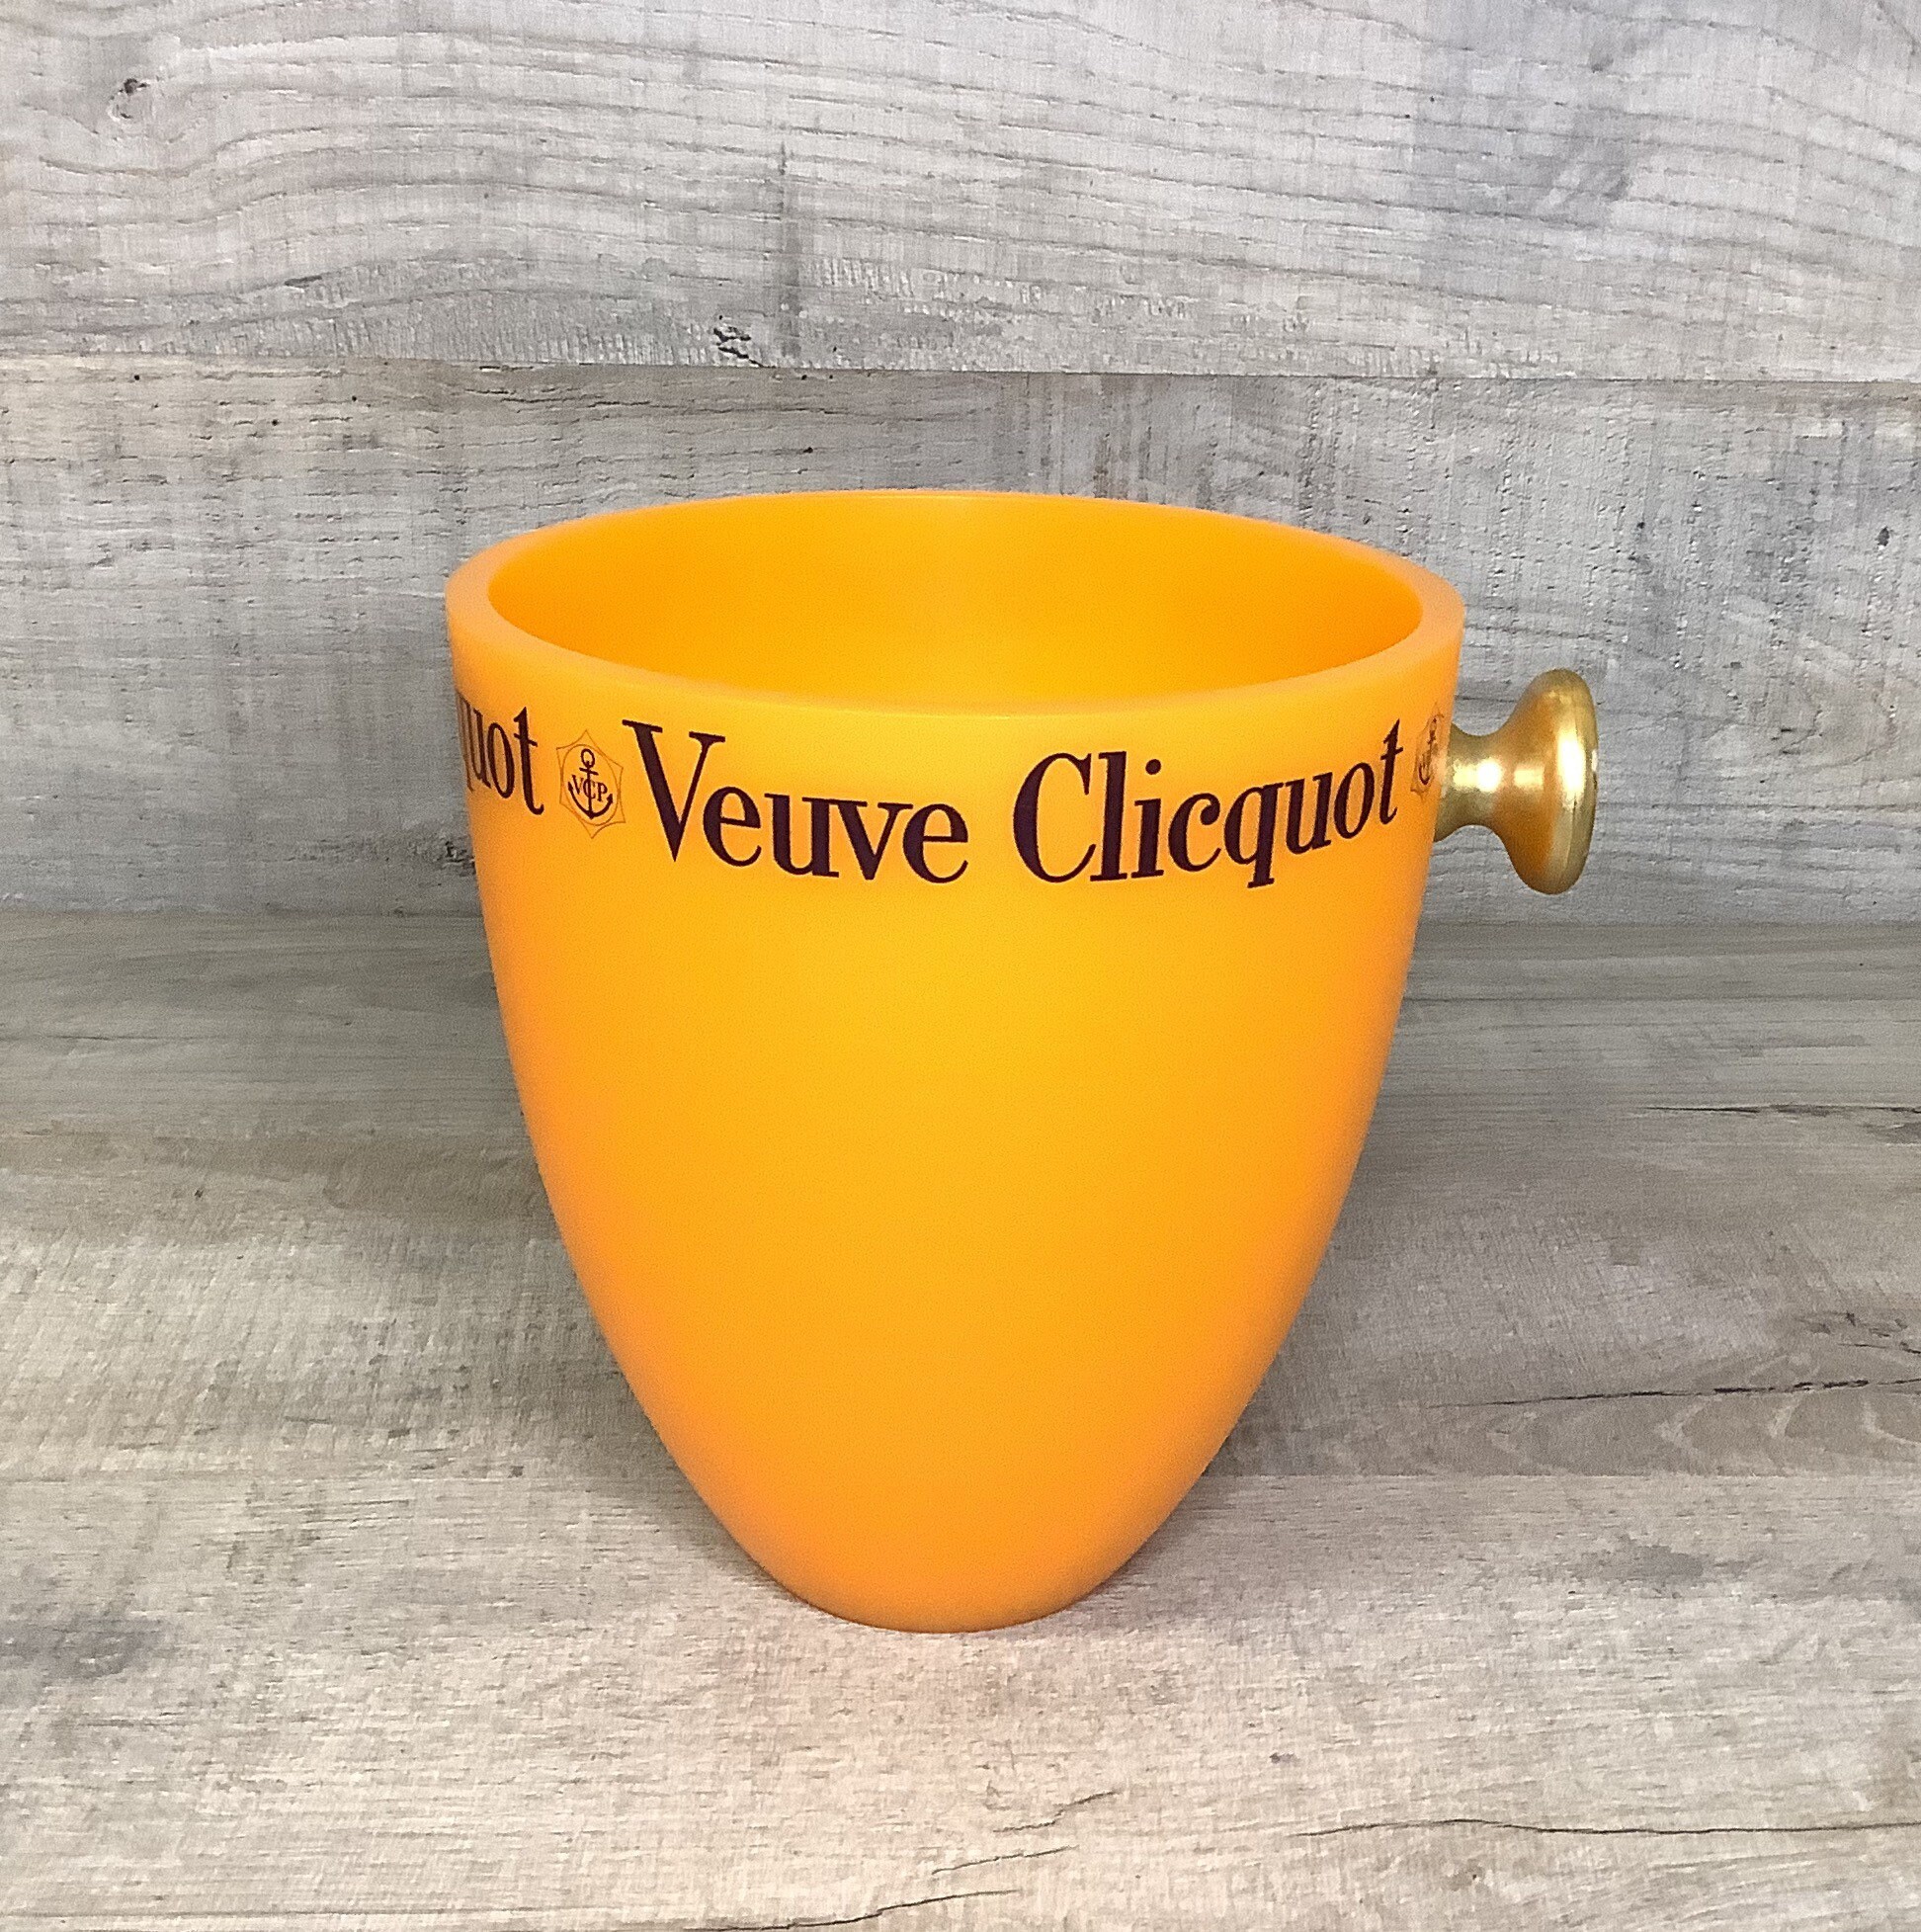 Seau à Champagne Veuve Clicquot/Champagne Ice Bucket From Veuve Clicquot Cooler French Vintage Wine 